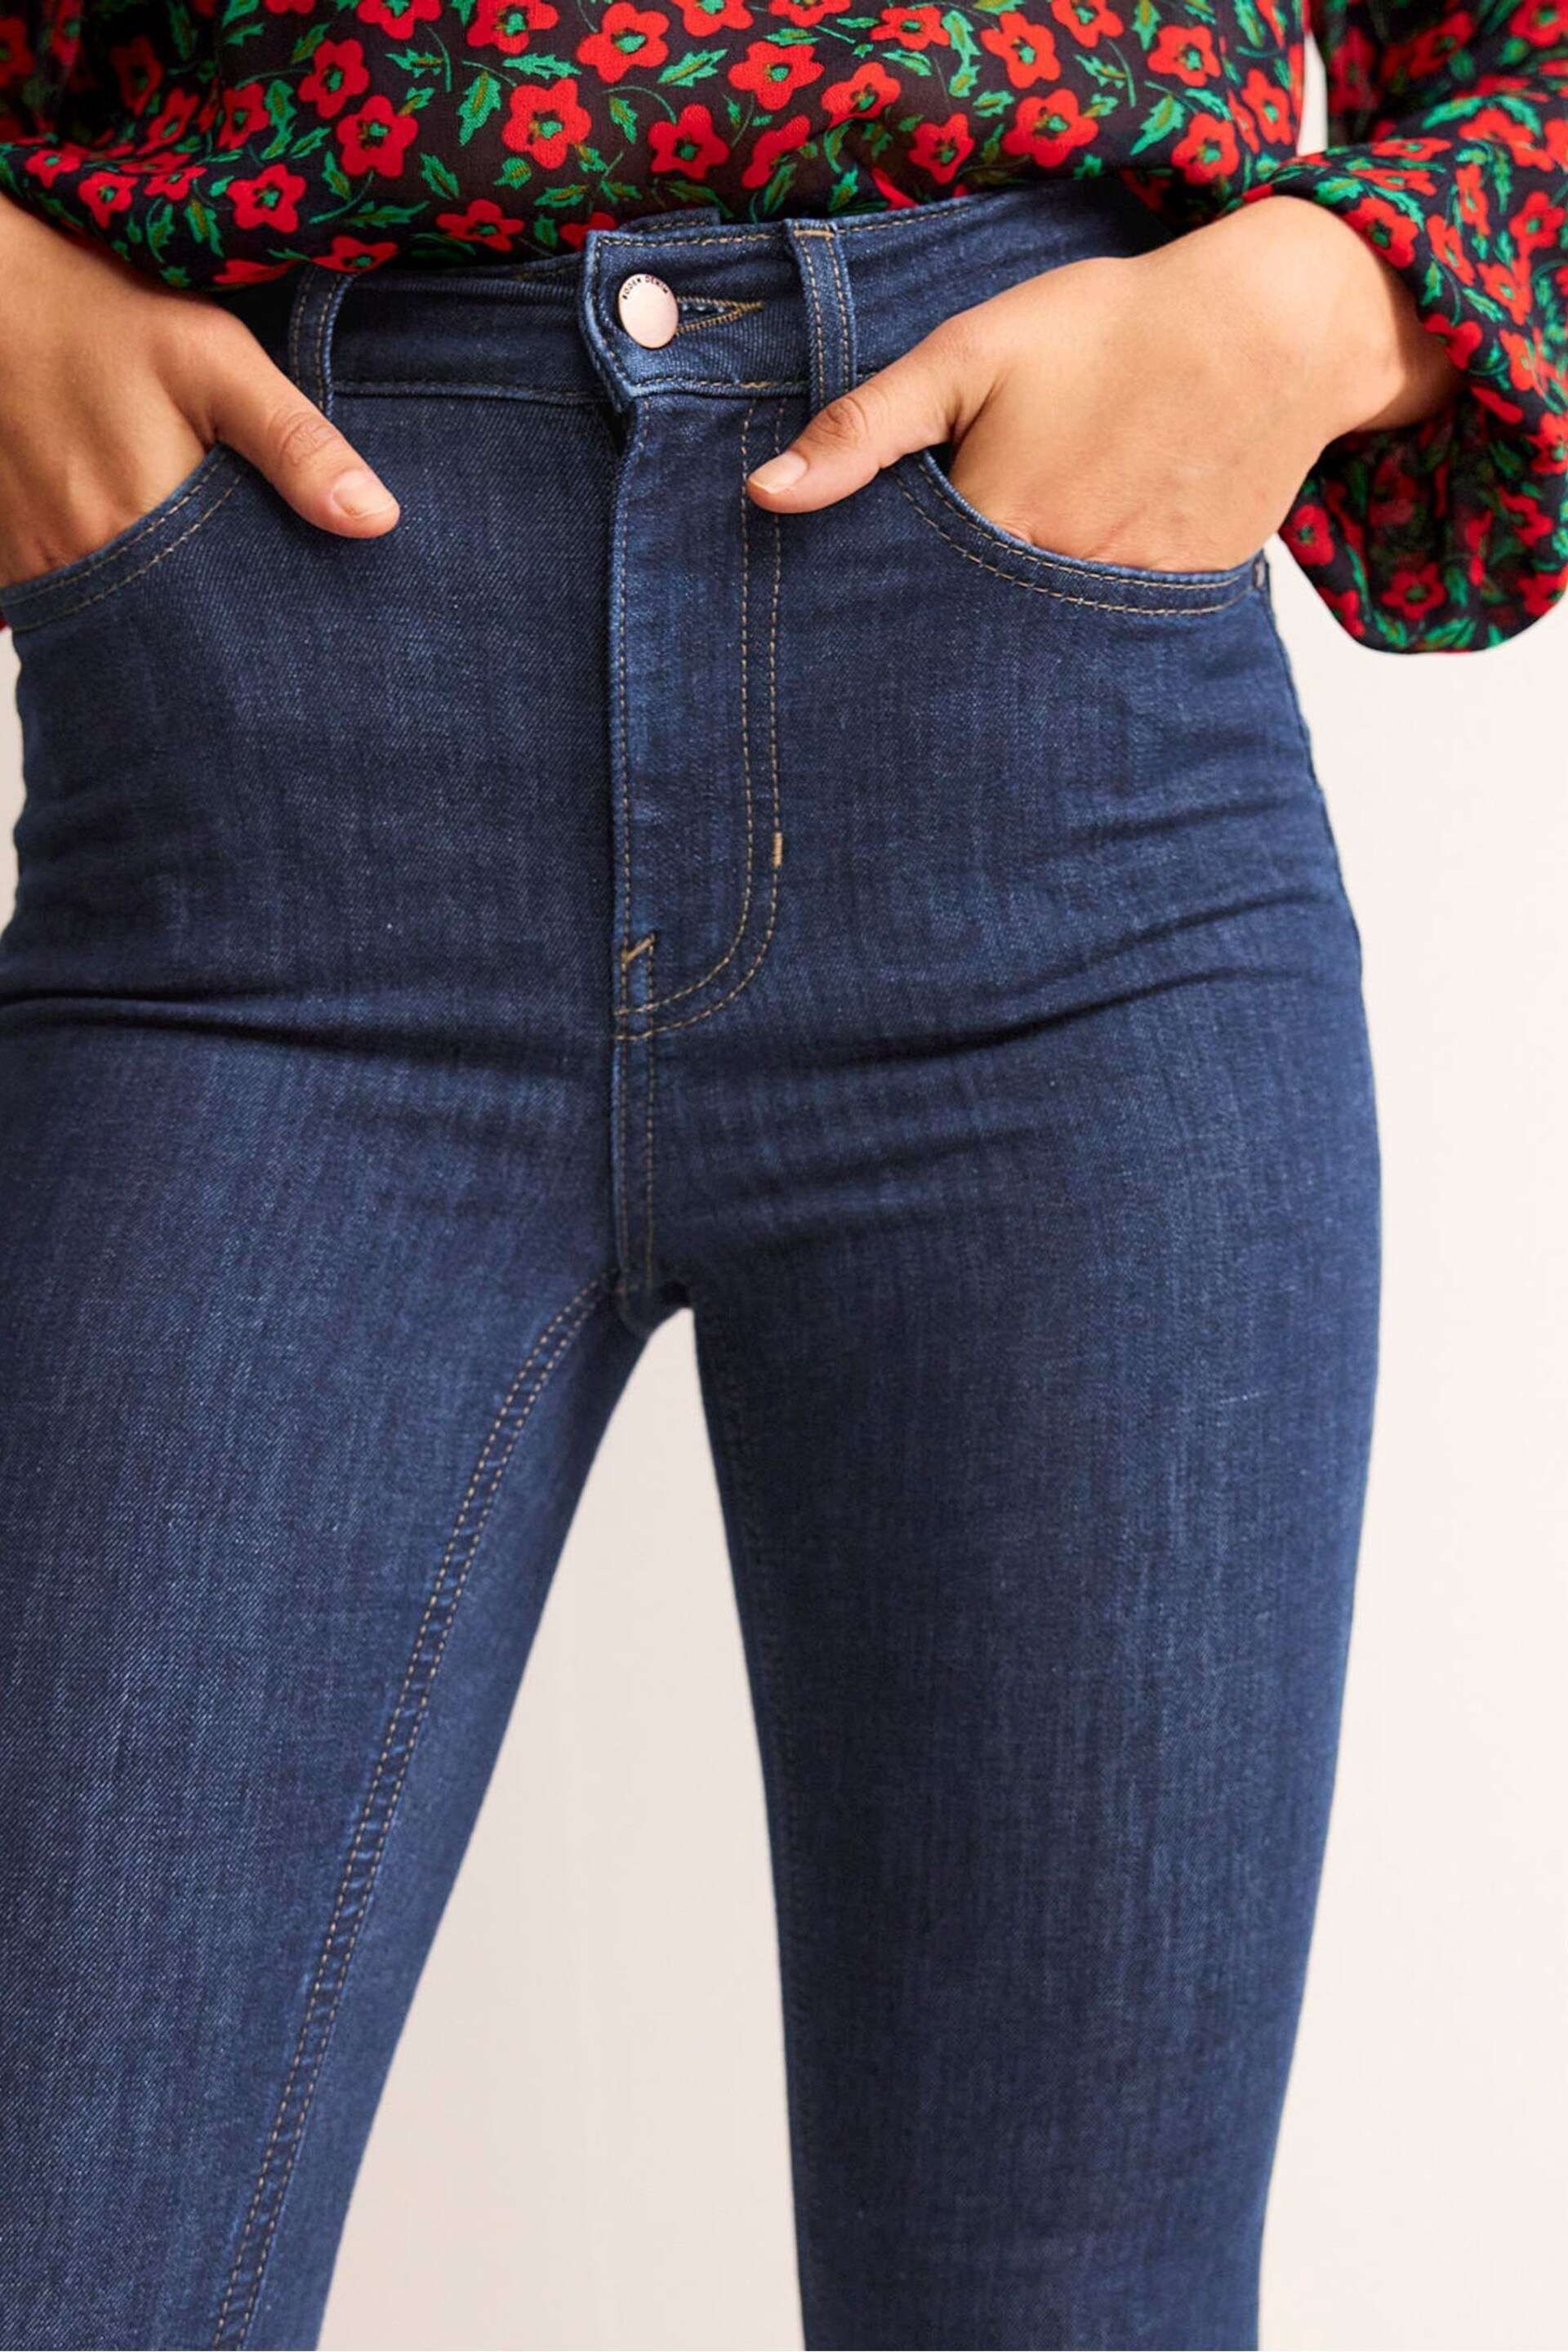 Boden Blue Comfort Stretch Jeans - Image 4 of 6